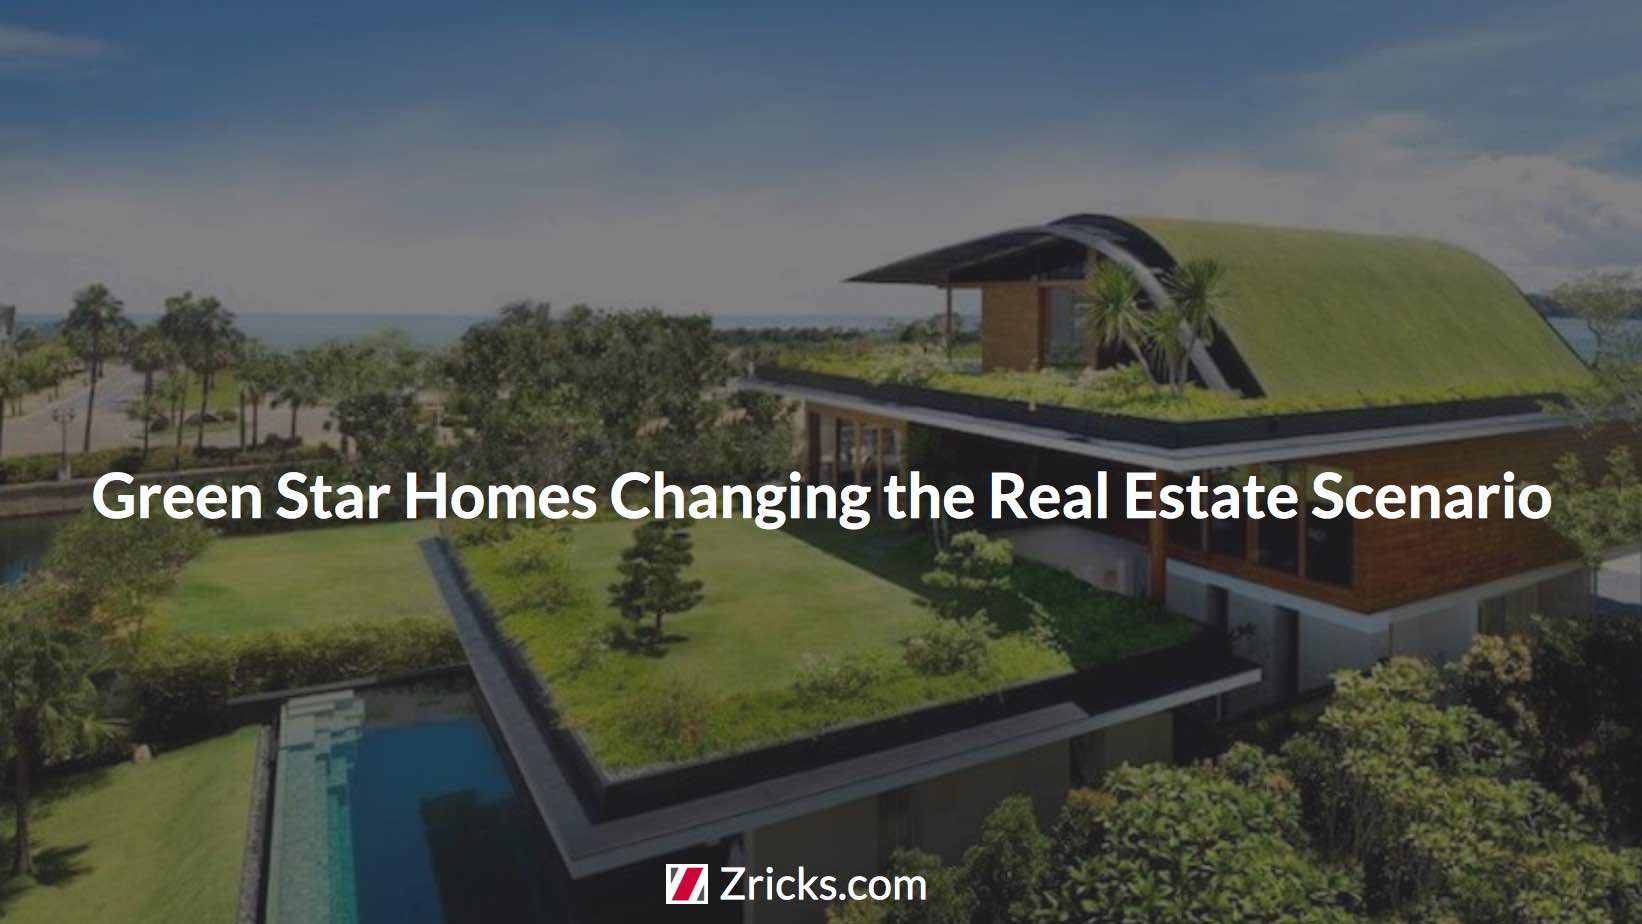 Green Star Homes Changing the Real Estate Scenario Update